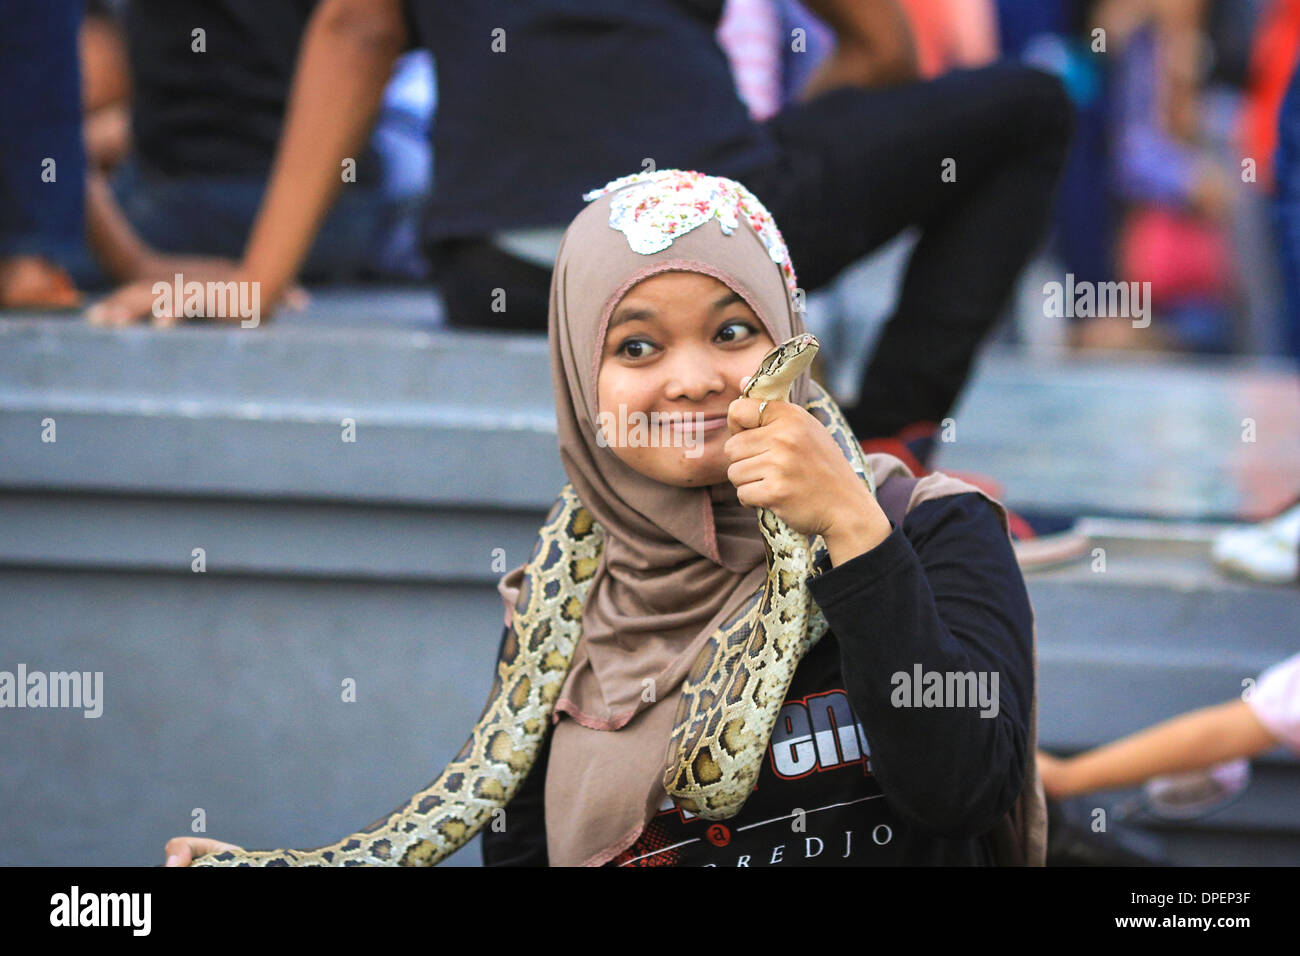 Indonesian woman holding a snake in Jakarta Kota, Indonesia Stock Photo